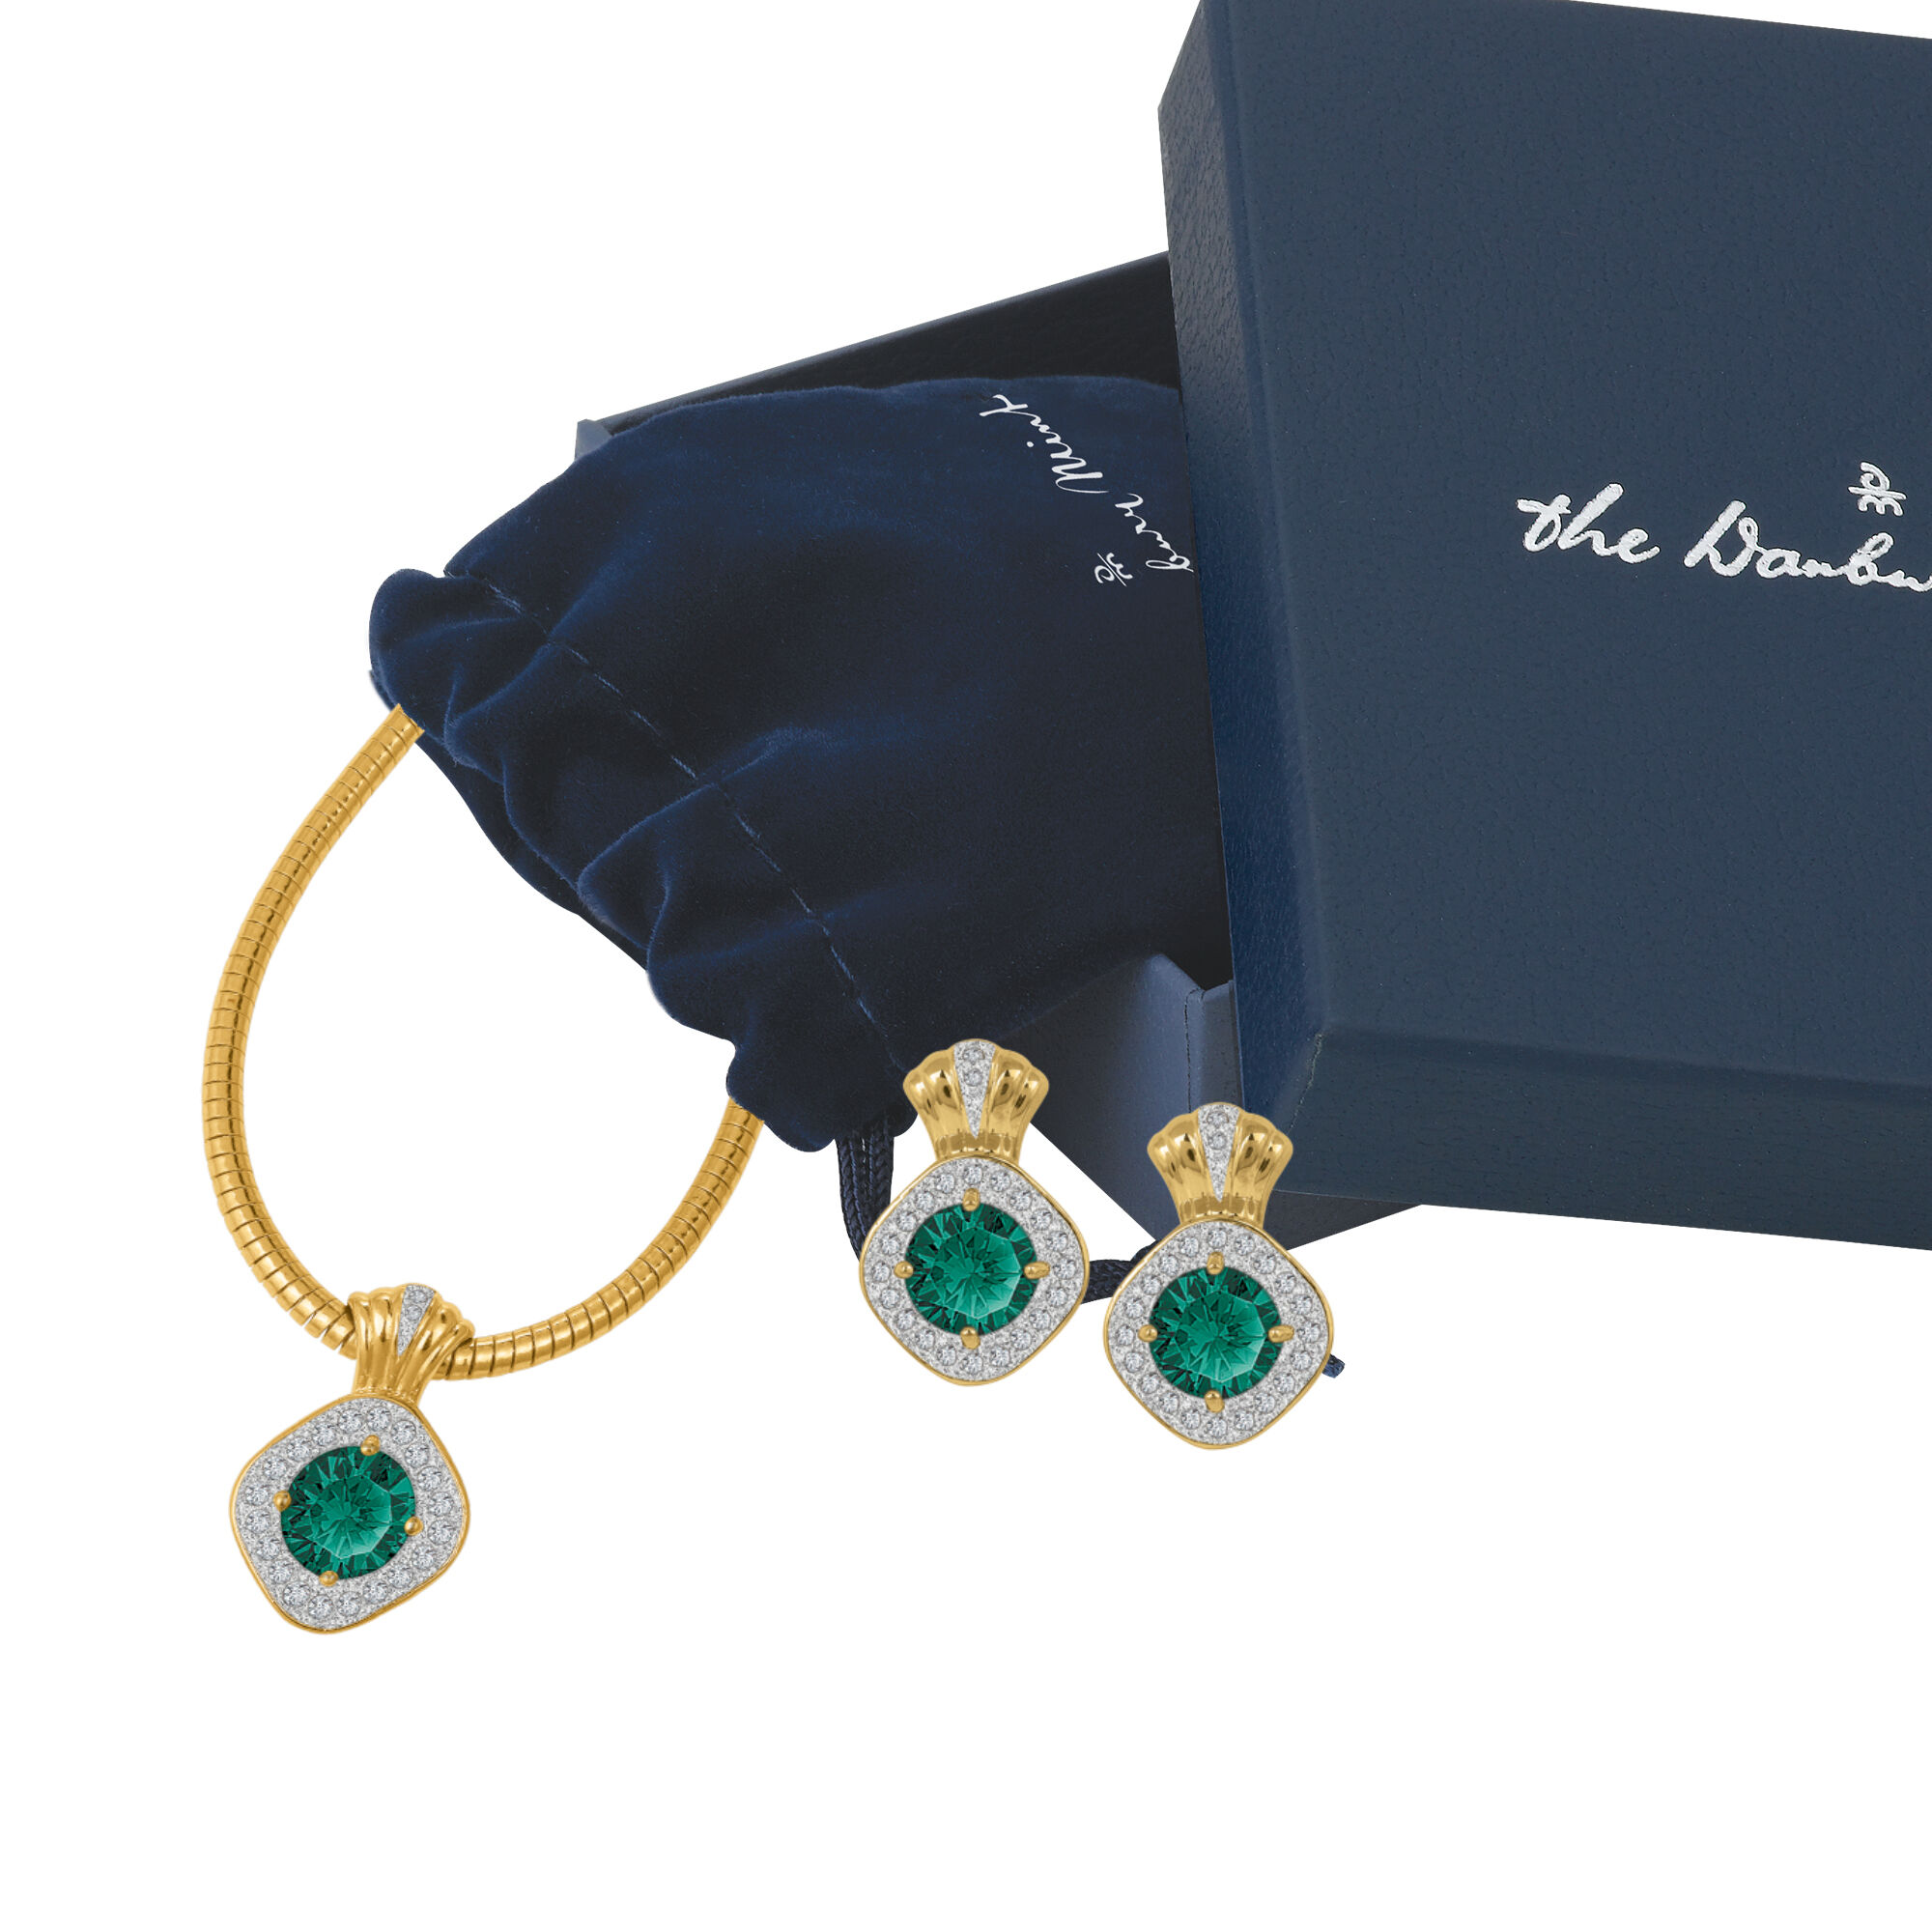 Birthstone Necklace Earring Set 10787 0016 p gift pouchbox